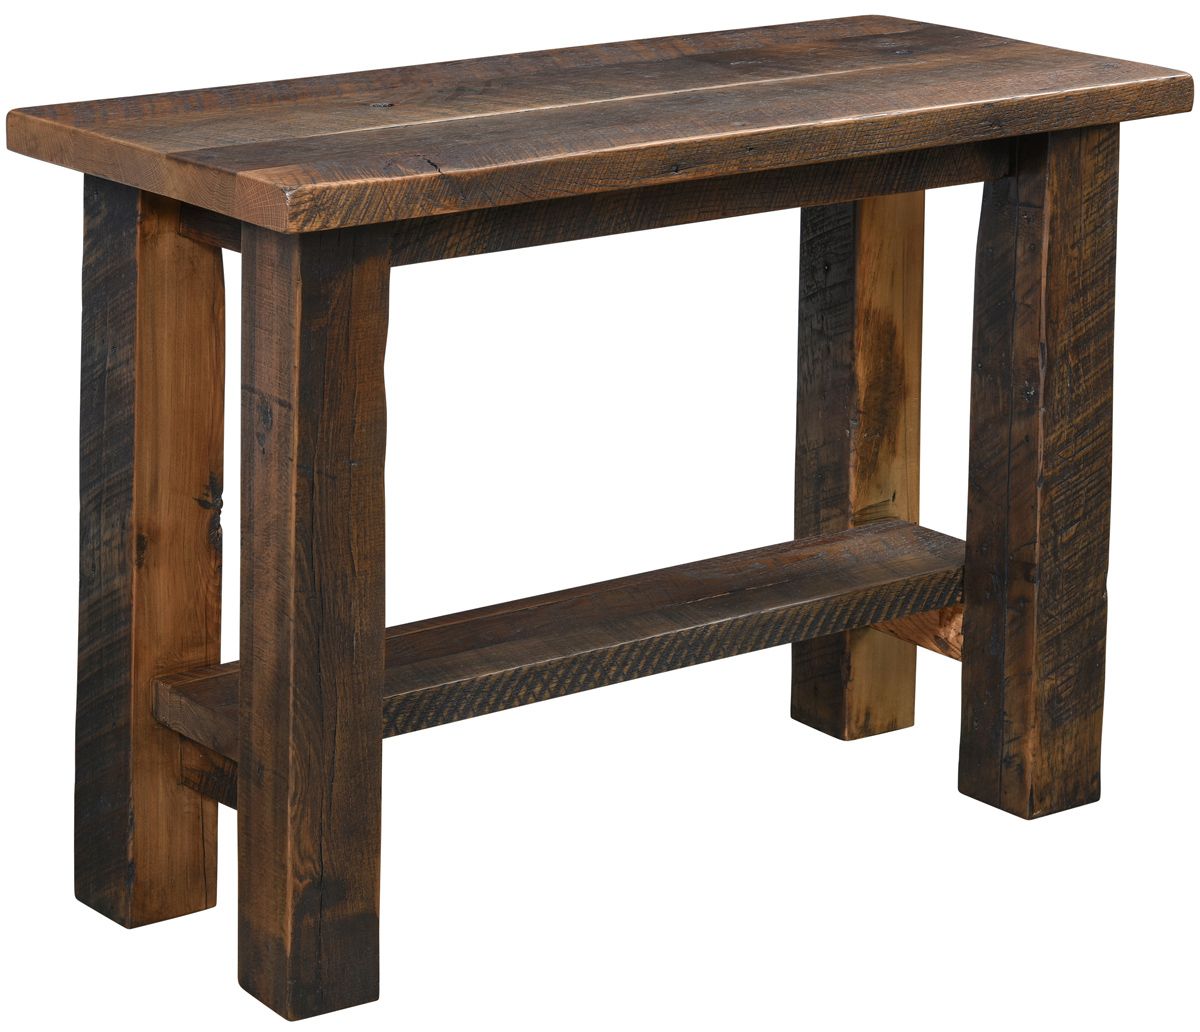 Up To 33% Off Kingston Reclaimed Barnwood Sofa Table With Shelf | Amish Throughout Smoked Barnwood Console Tables (View 13 of 20)